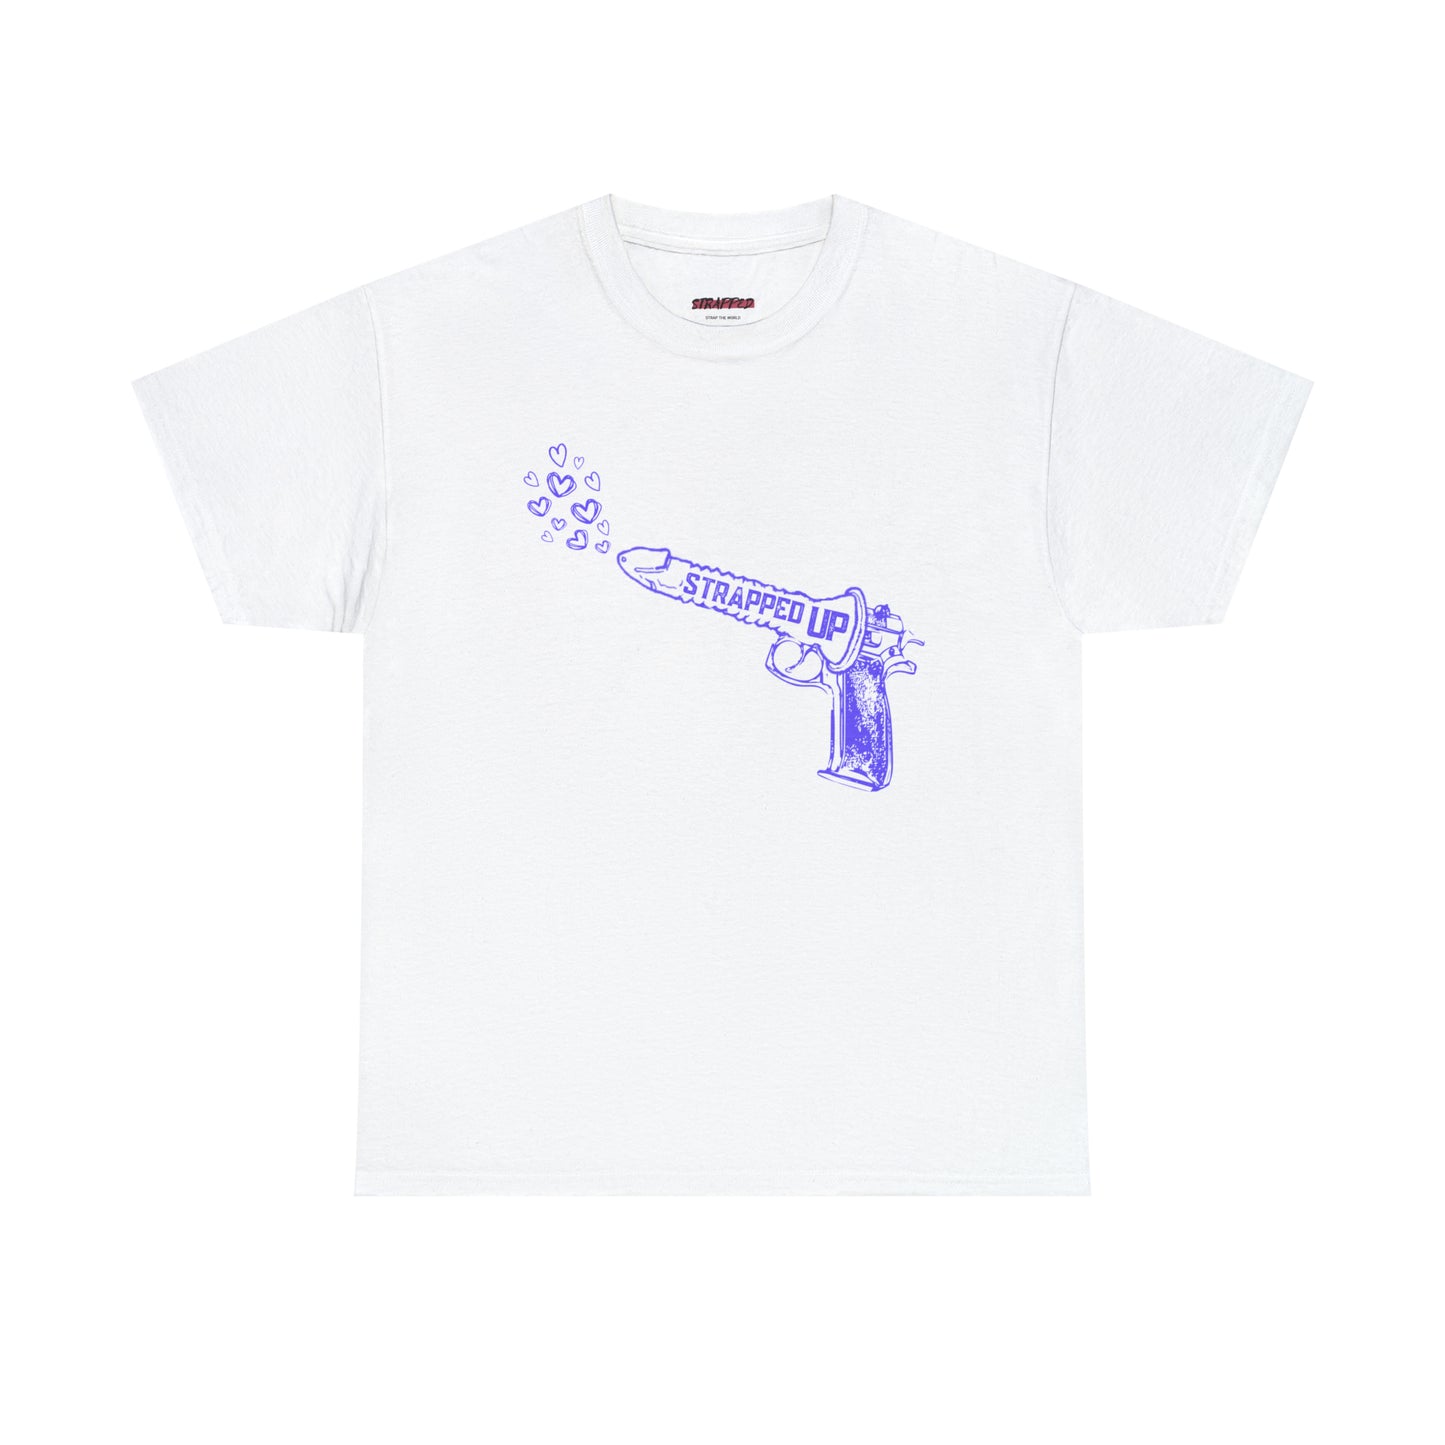 Strapped Up! Tee